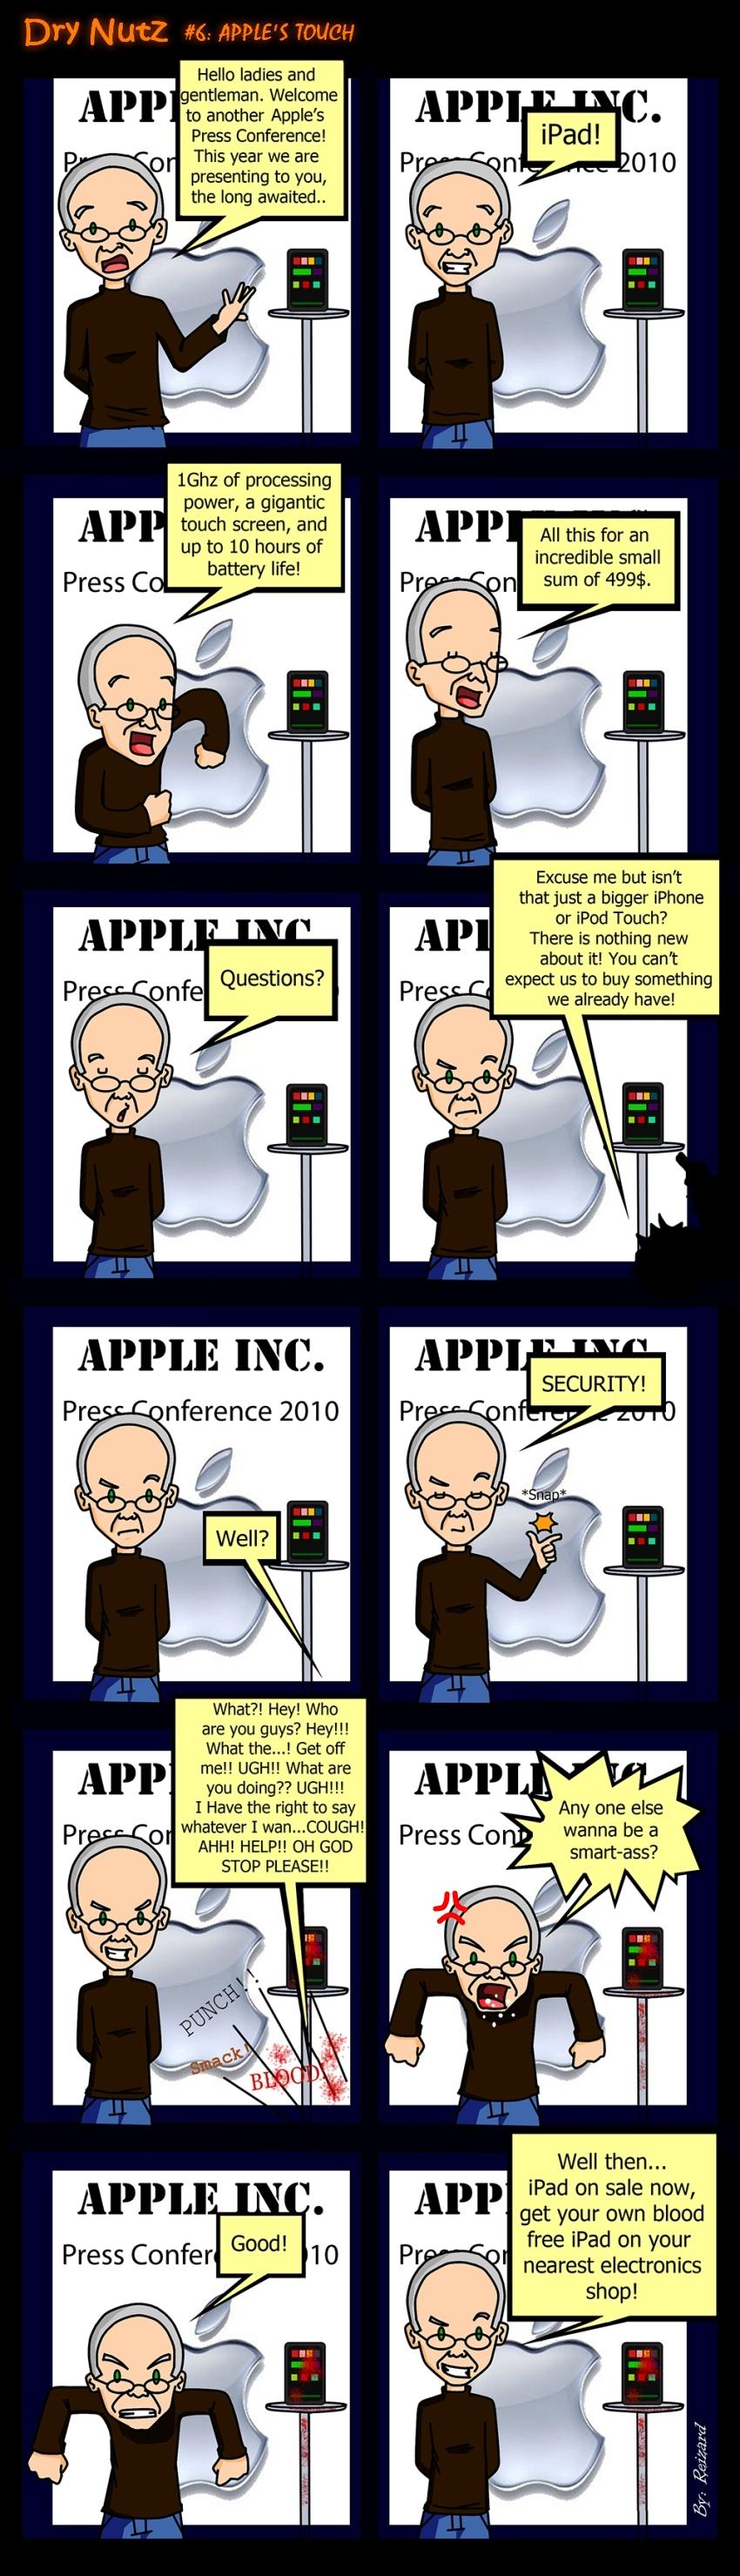 Apple's Touch